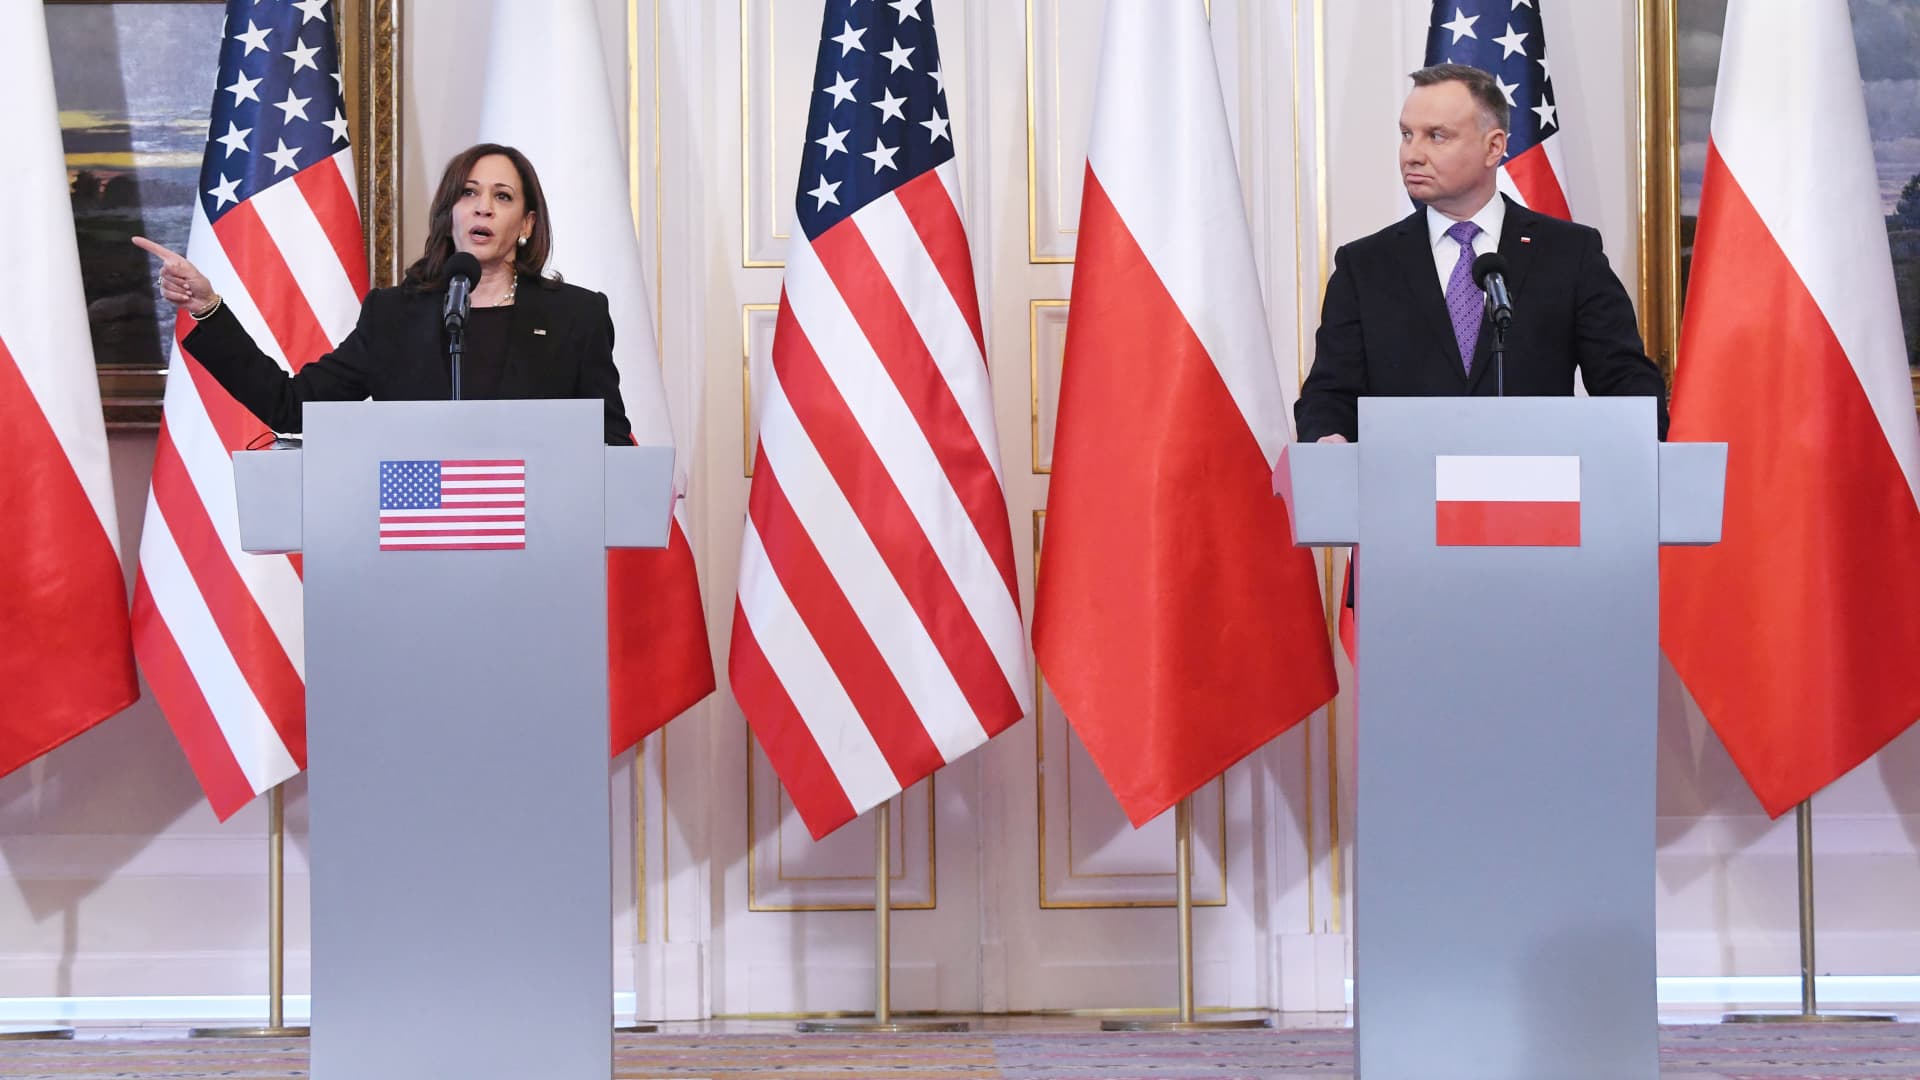 US Vice President Kamala Harris and Polish President Andrzej Duda hold a press conference at Belwelder Palace in Warsaw, Poland, March 10, 2022.